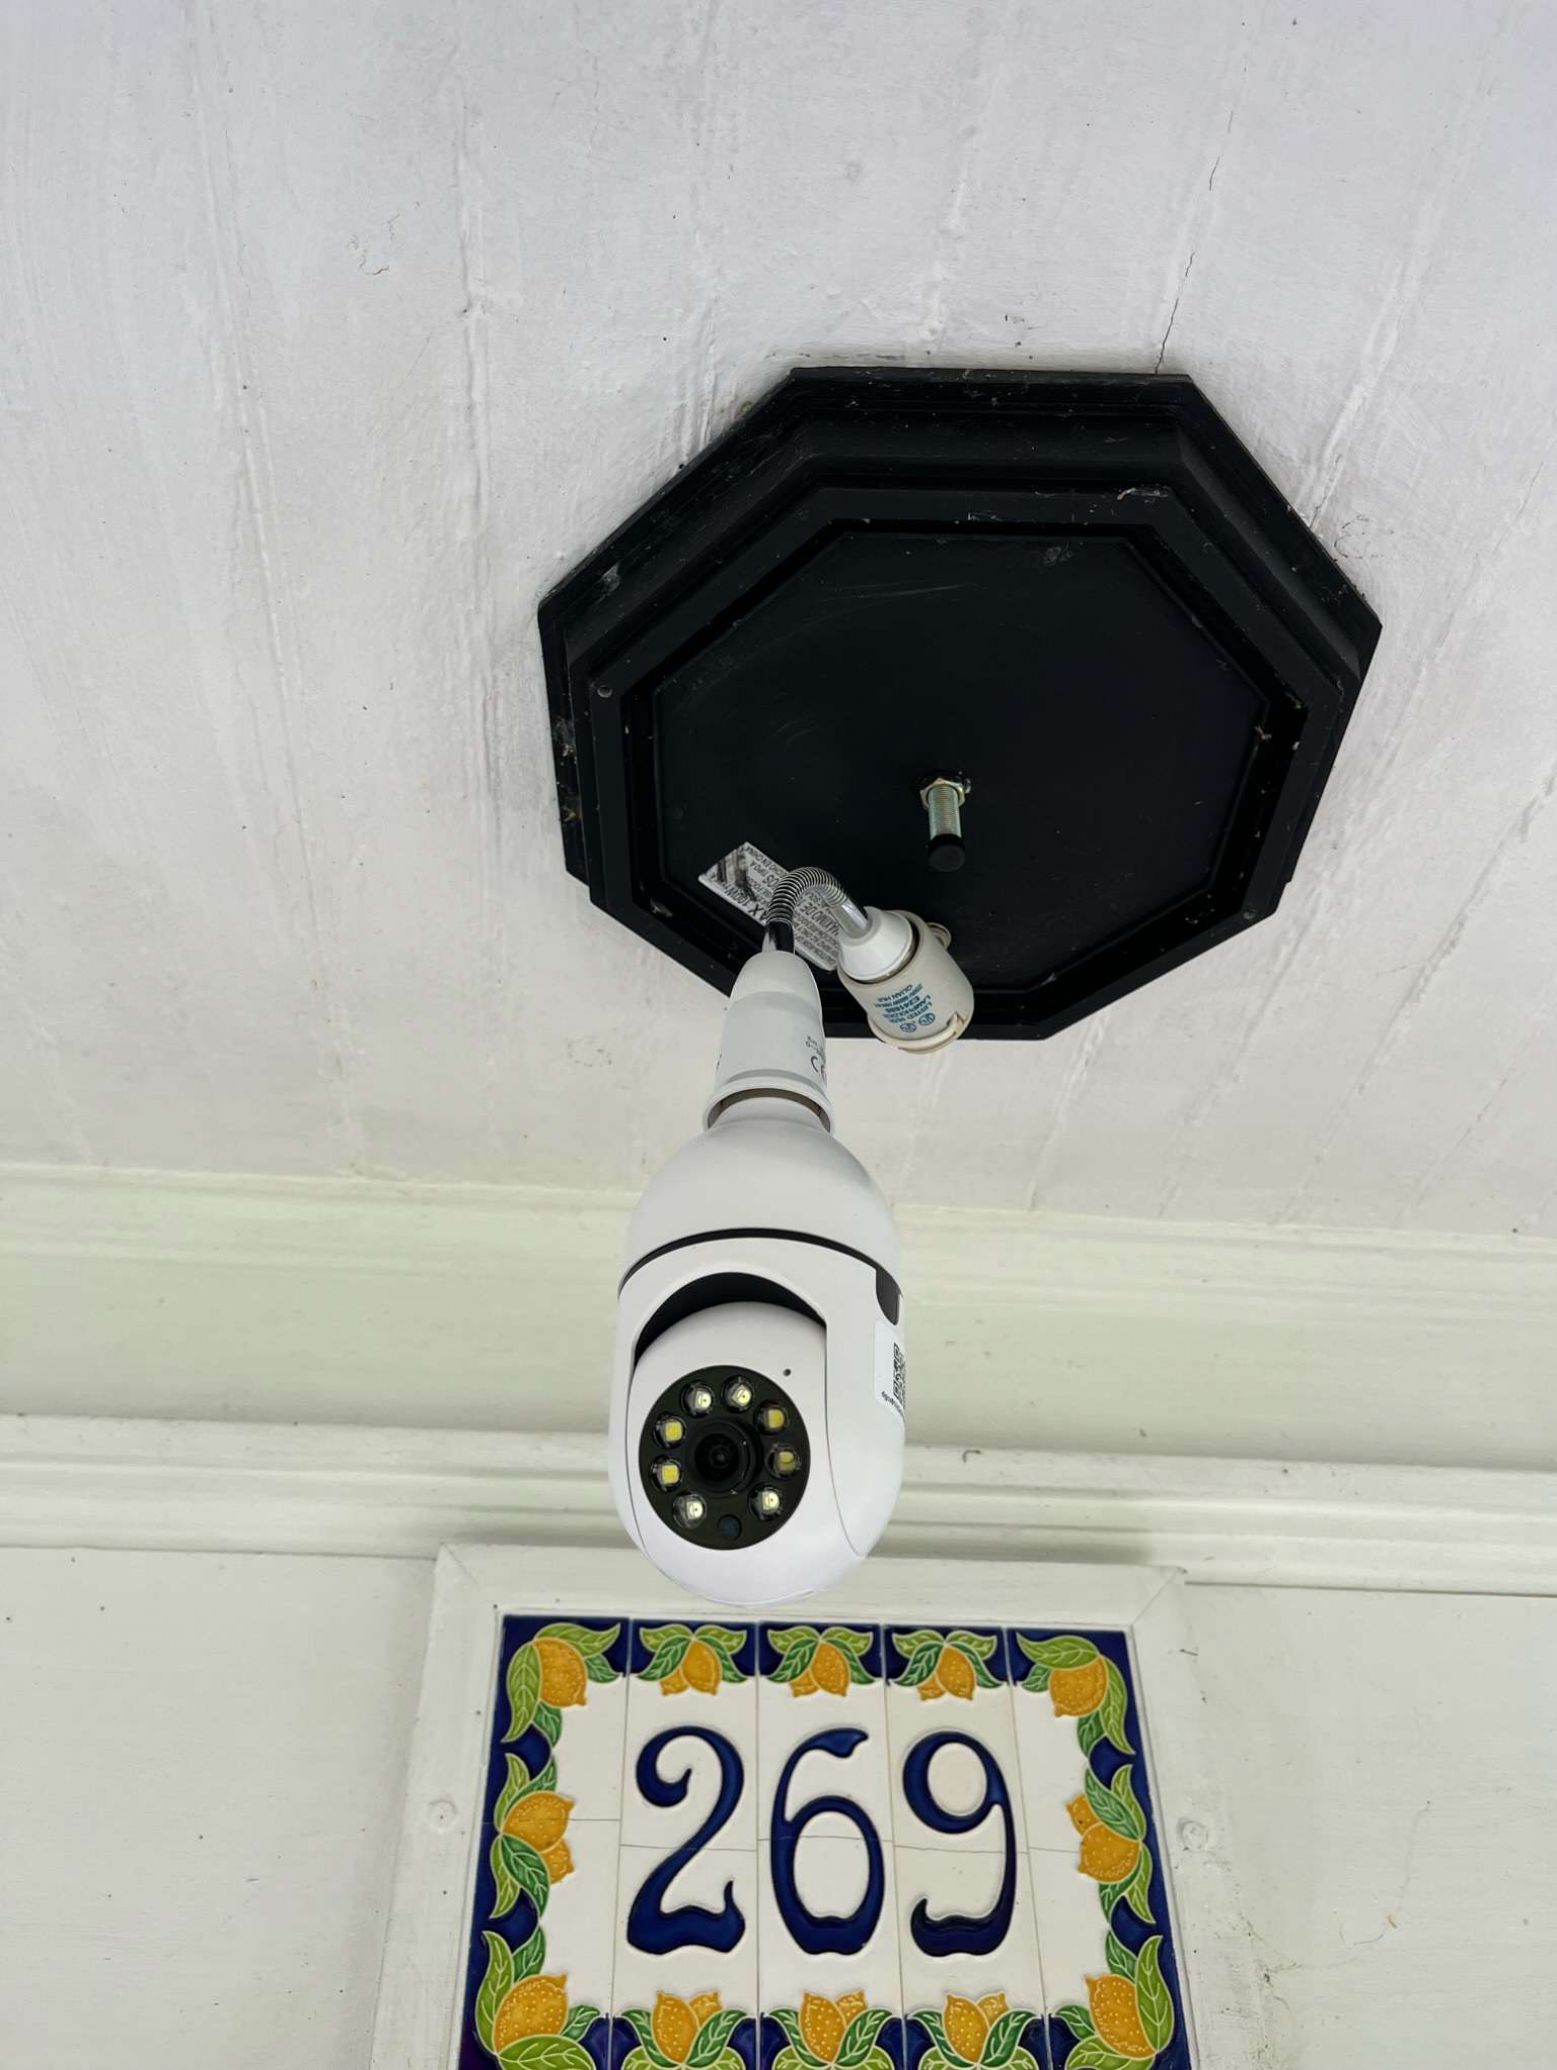 Review On Nomad Security Camera